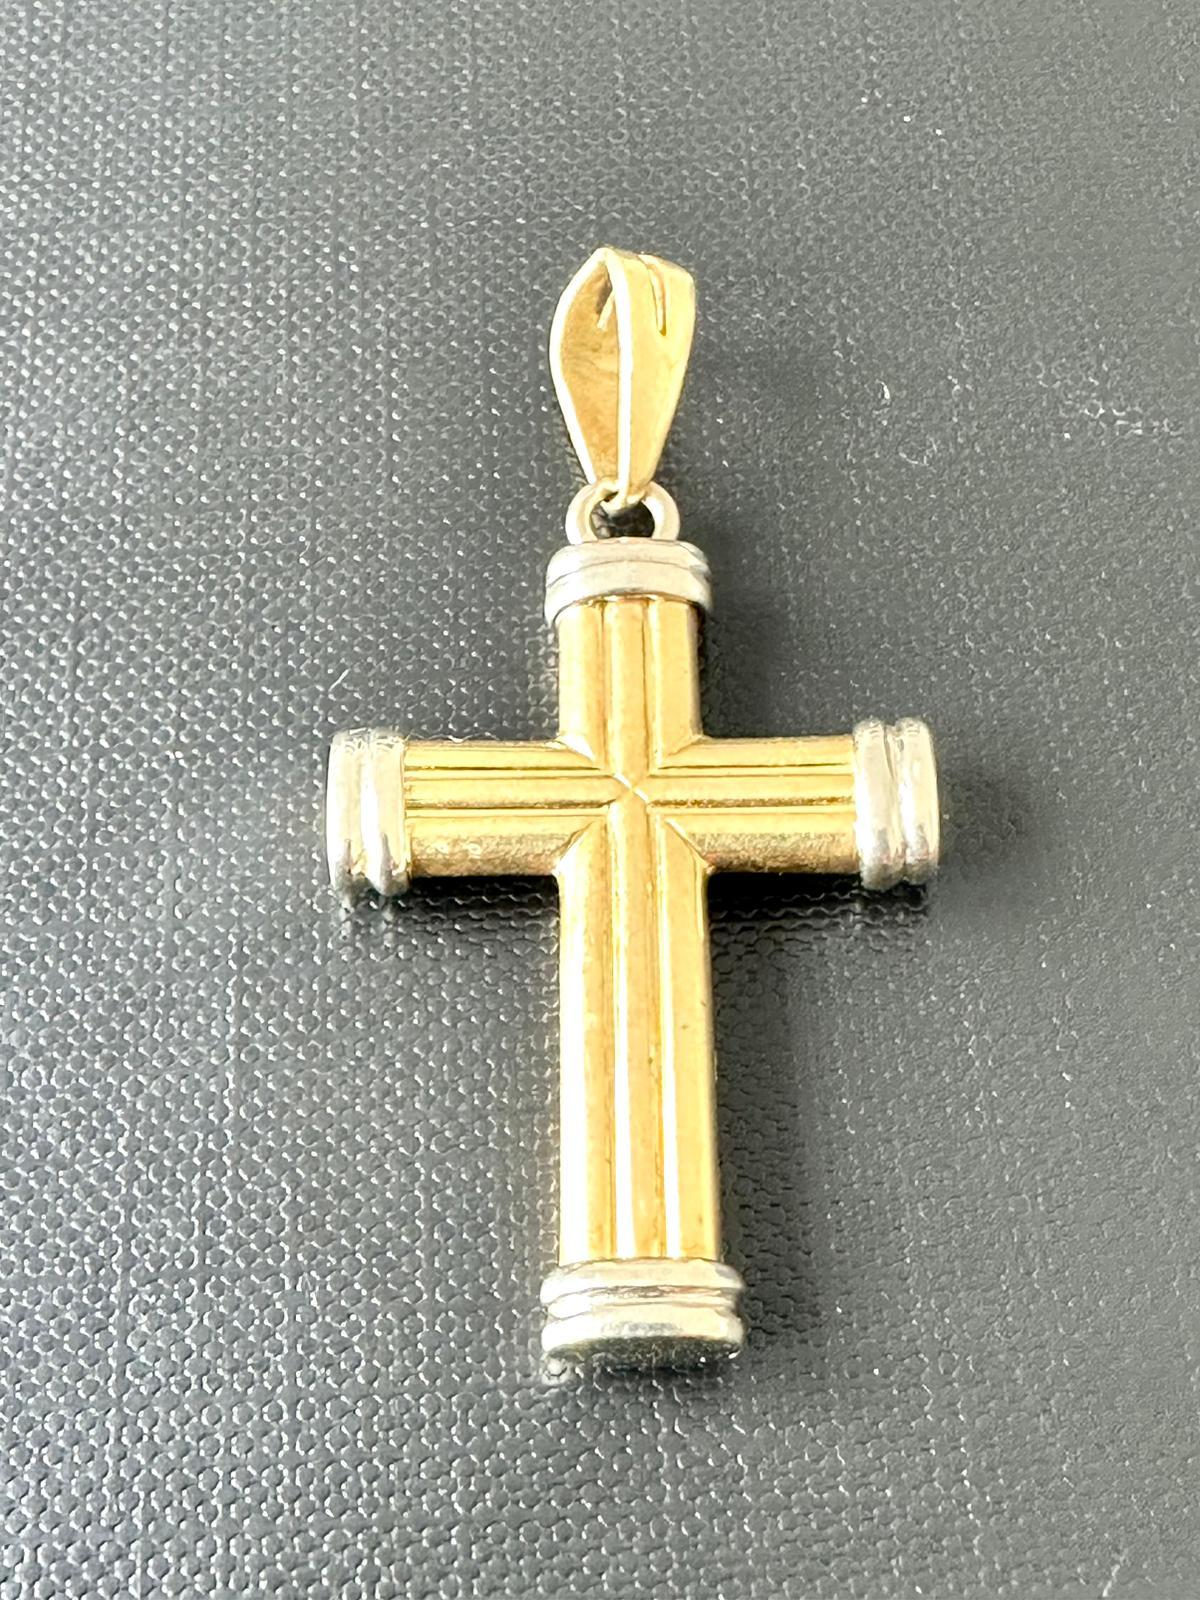 The magnificent relief work of this Italian cross showcases two ancient Roman columns crossing each other. This pendant has been crafted in 18kt yellow gold, while the edges of the arms are in 18kt white gold representing the 